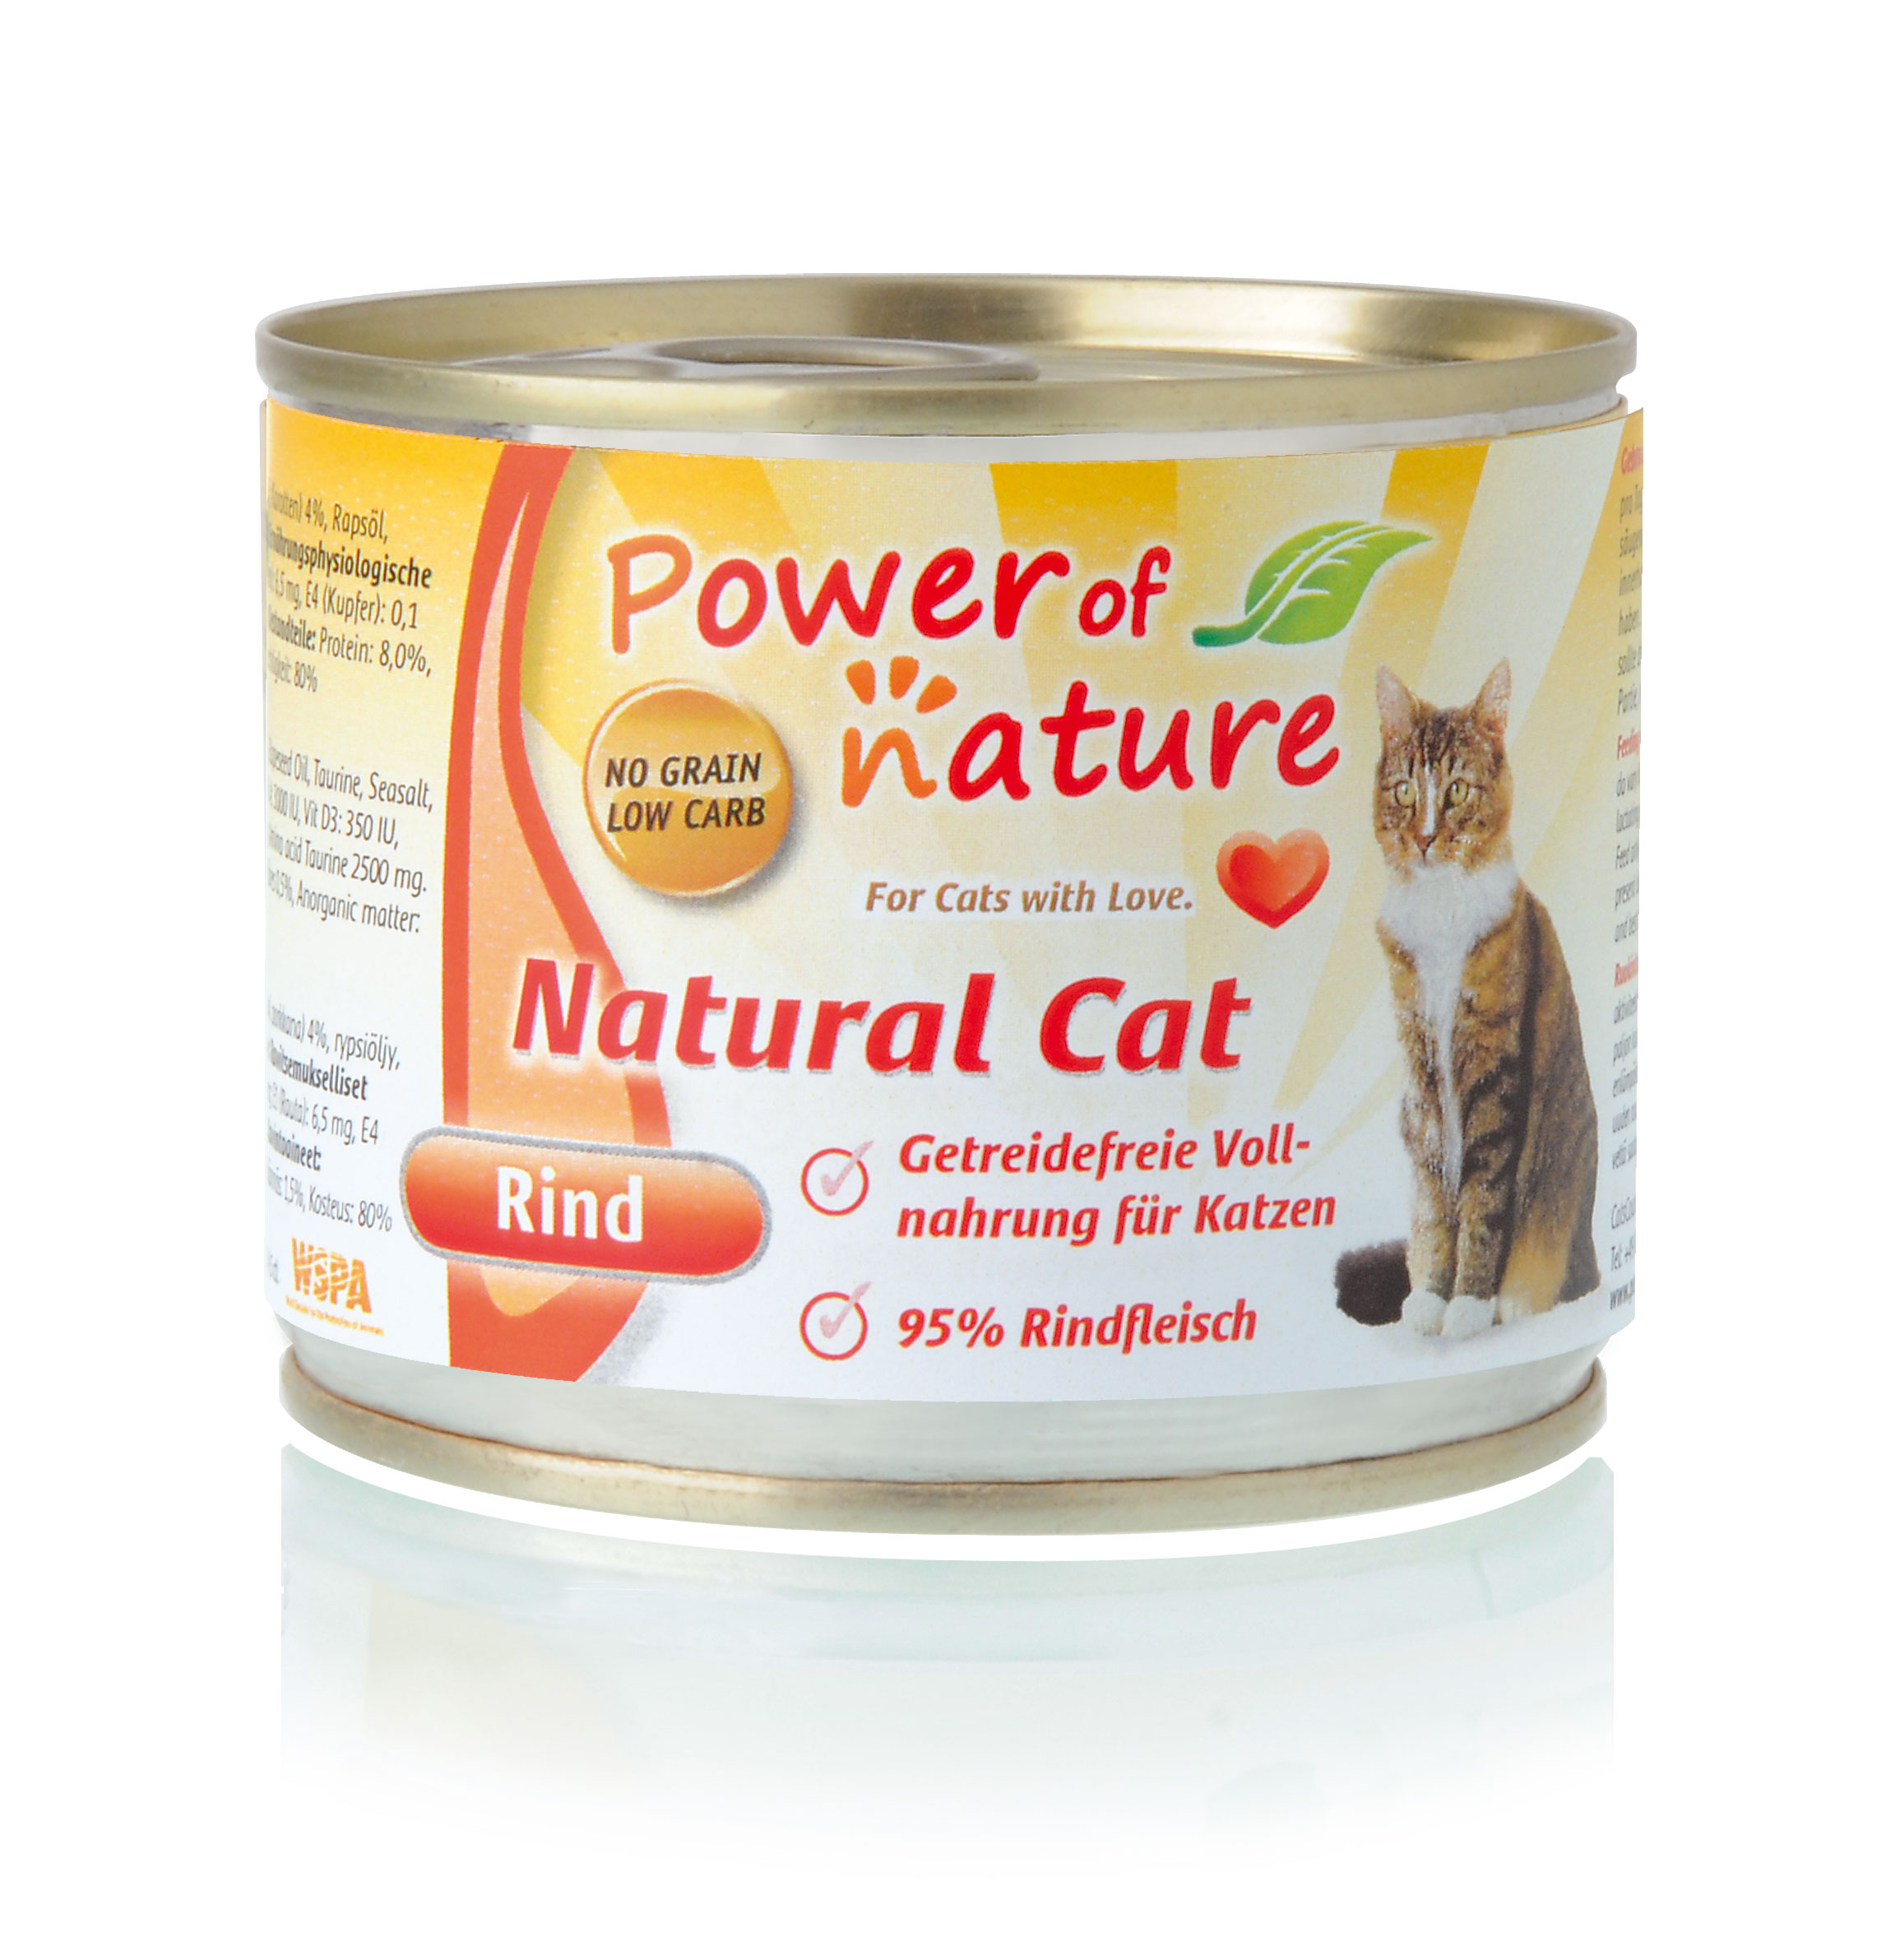 Power of Nature Natural Cat Dose Rind 24 x200g